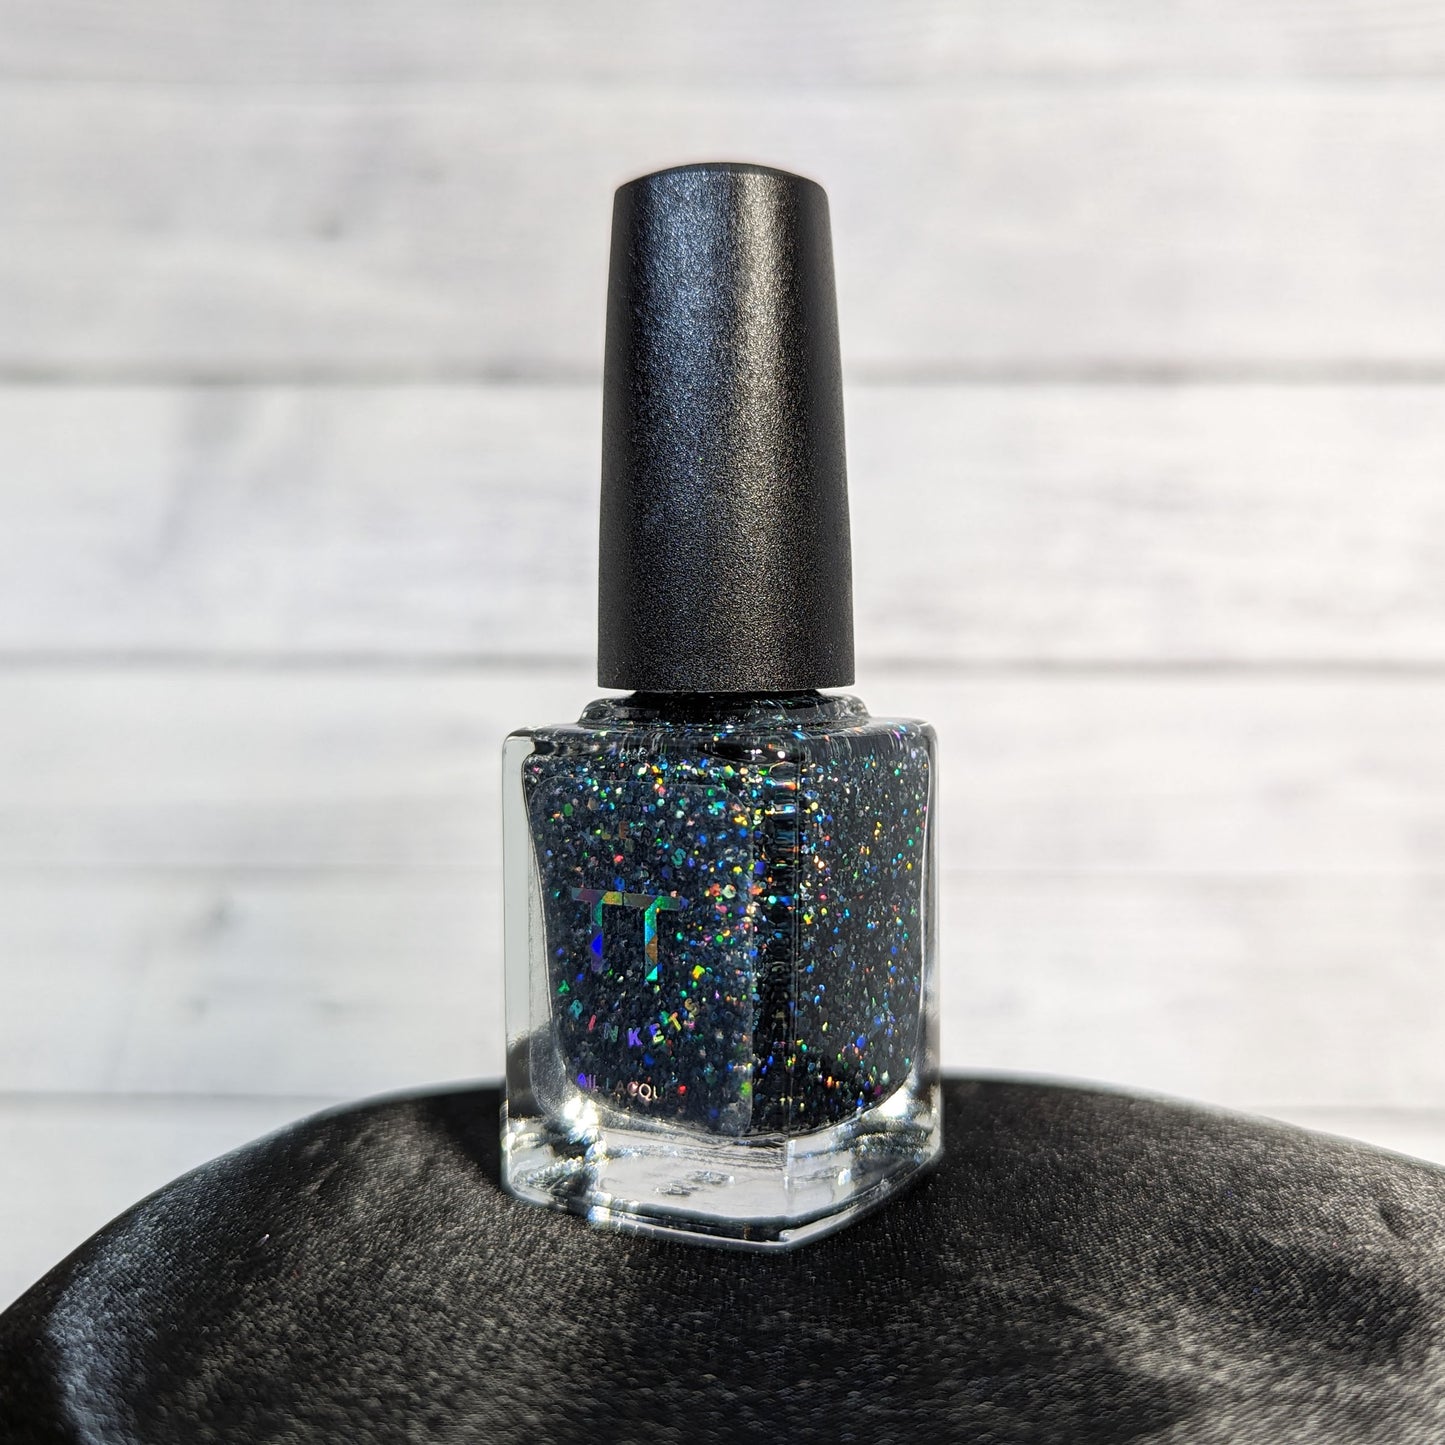 Darkness Can Be Beautiful - Black Holographic Topper